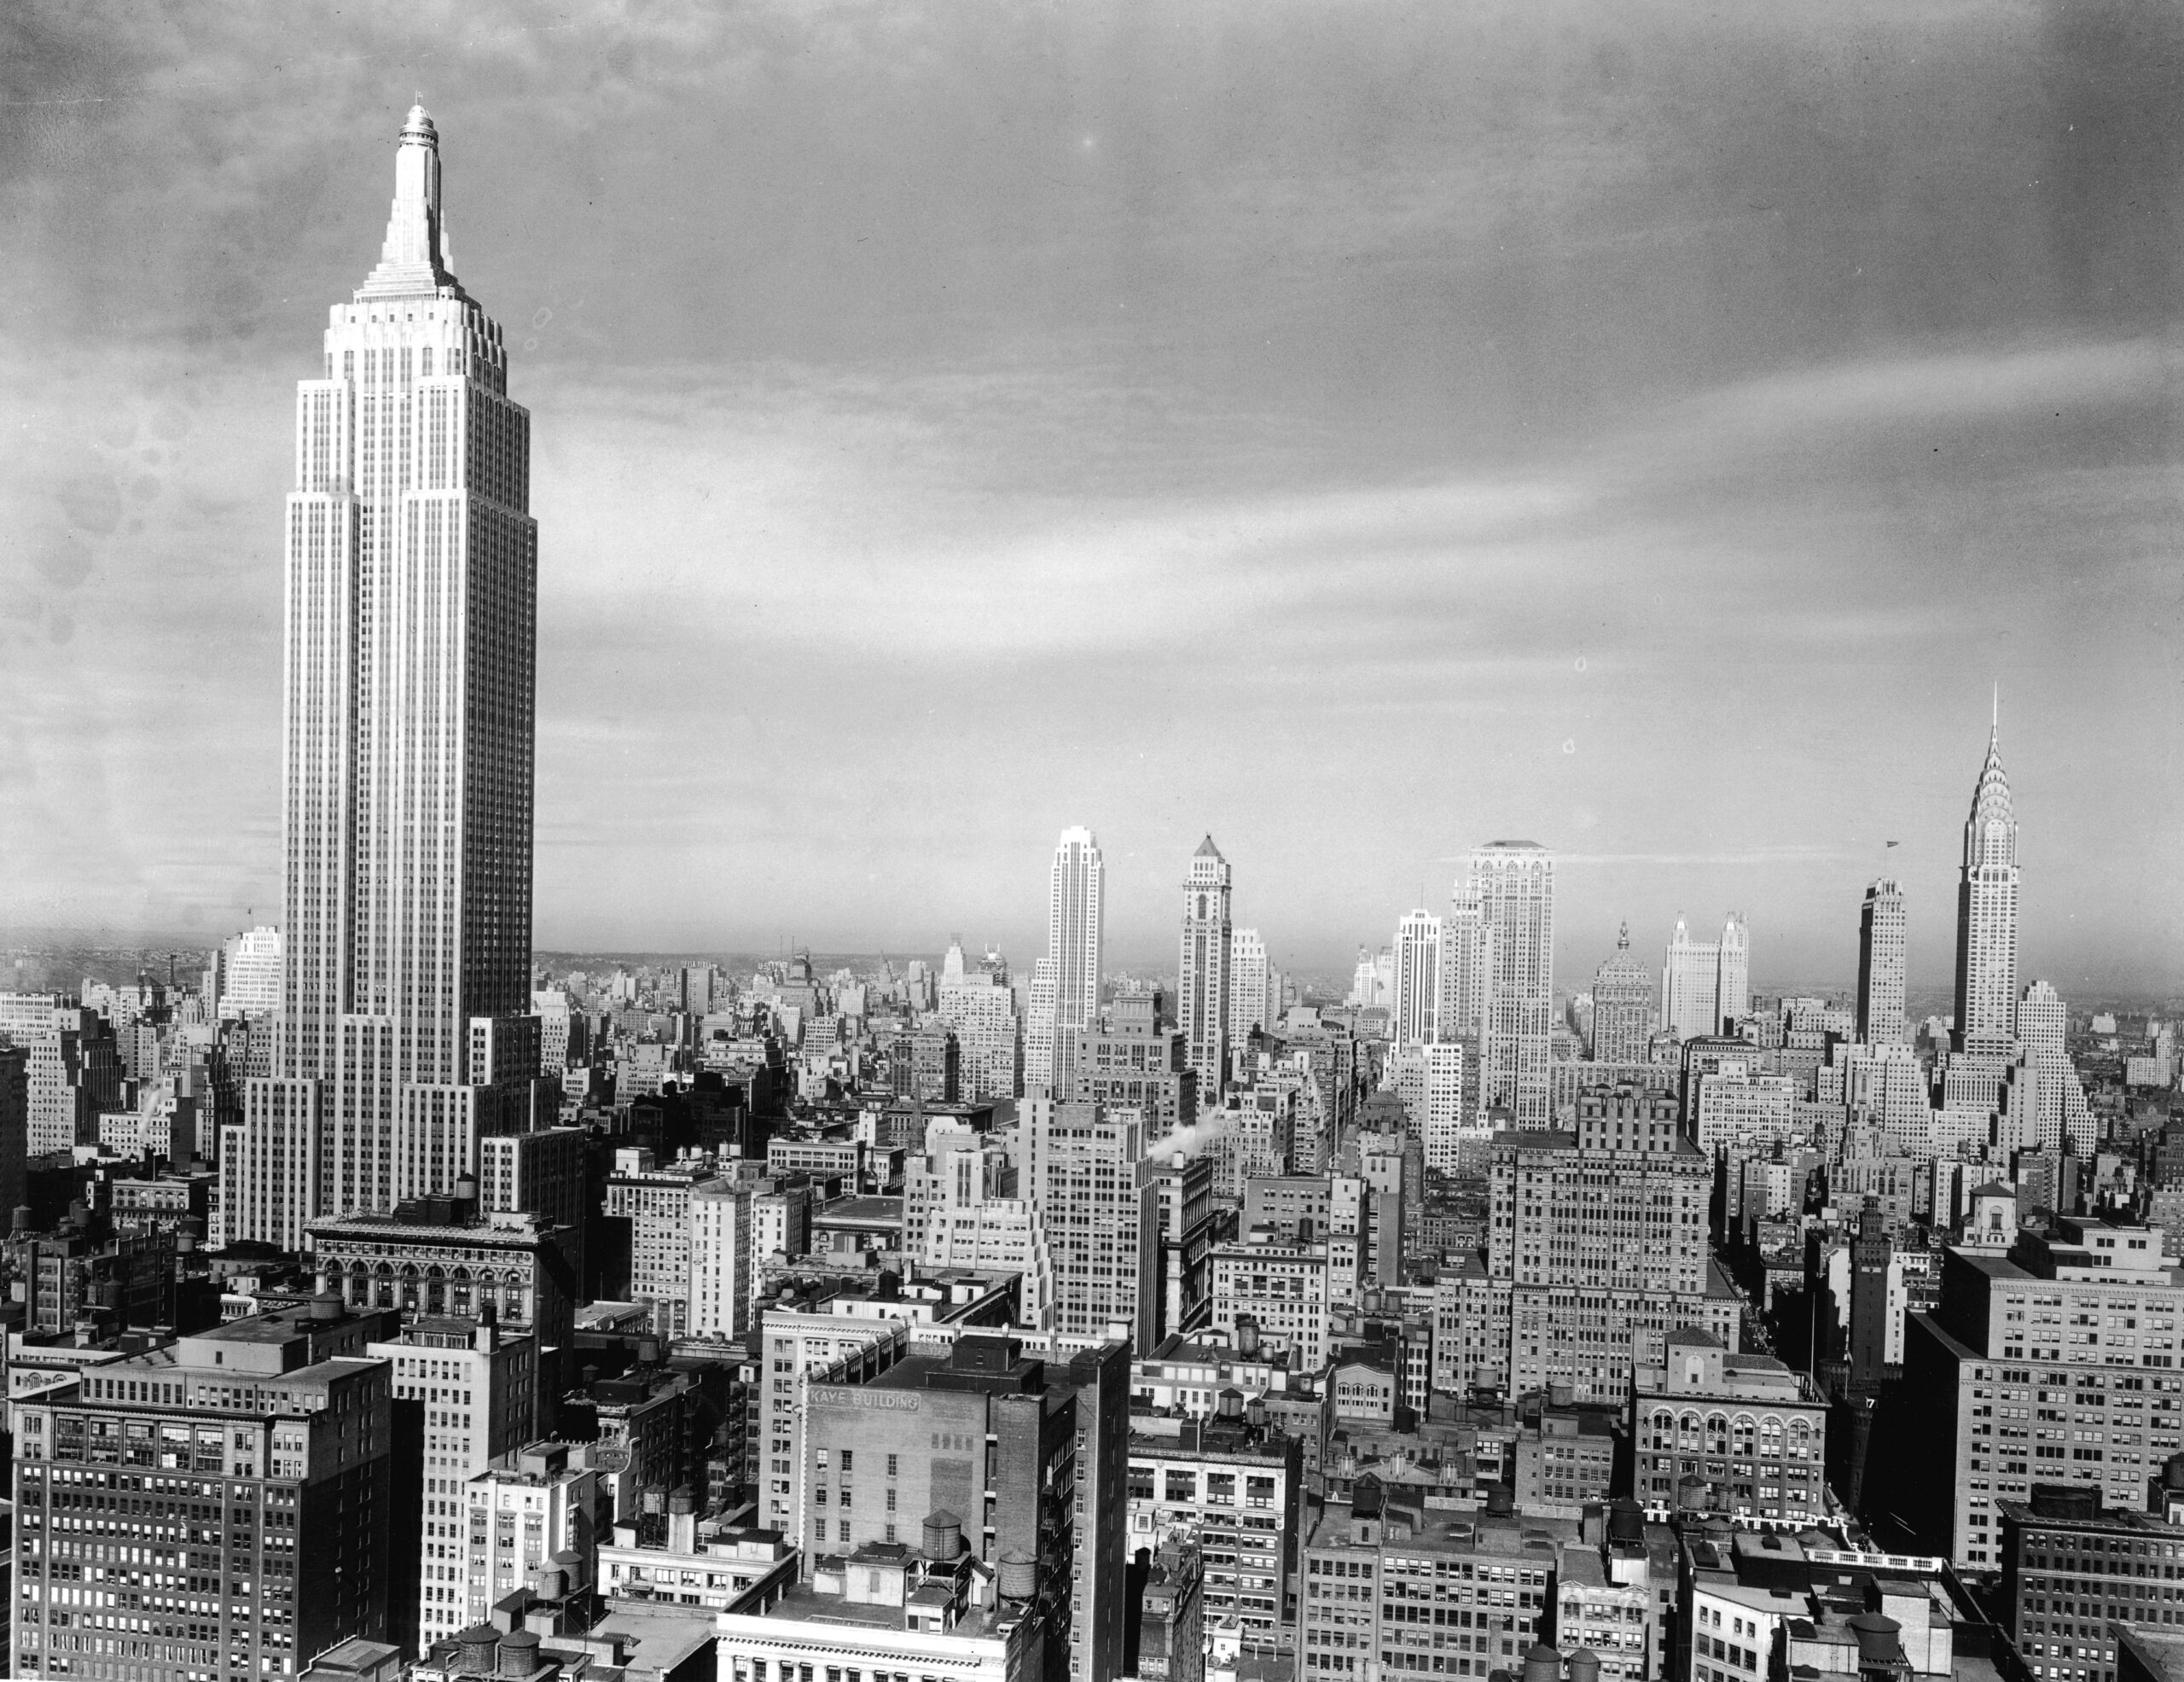 View of the Manhattan skyline with the Empire State Building and Chrysler Building (R), New York City, 1940s. (Photo Credit: Hulton Archive/Getty Images)